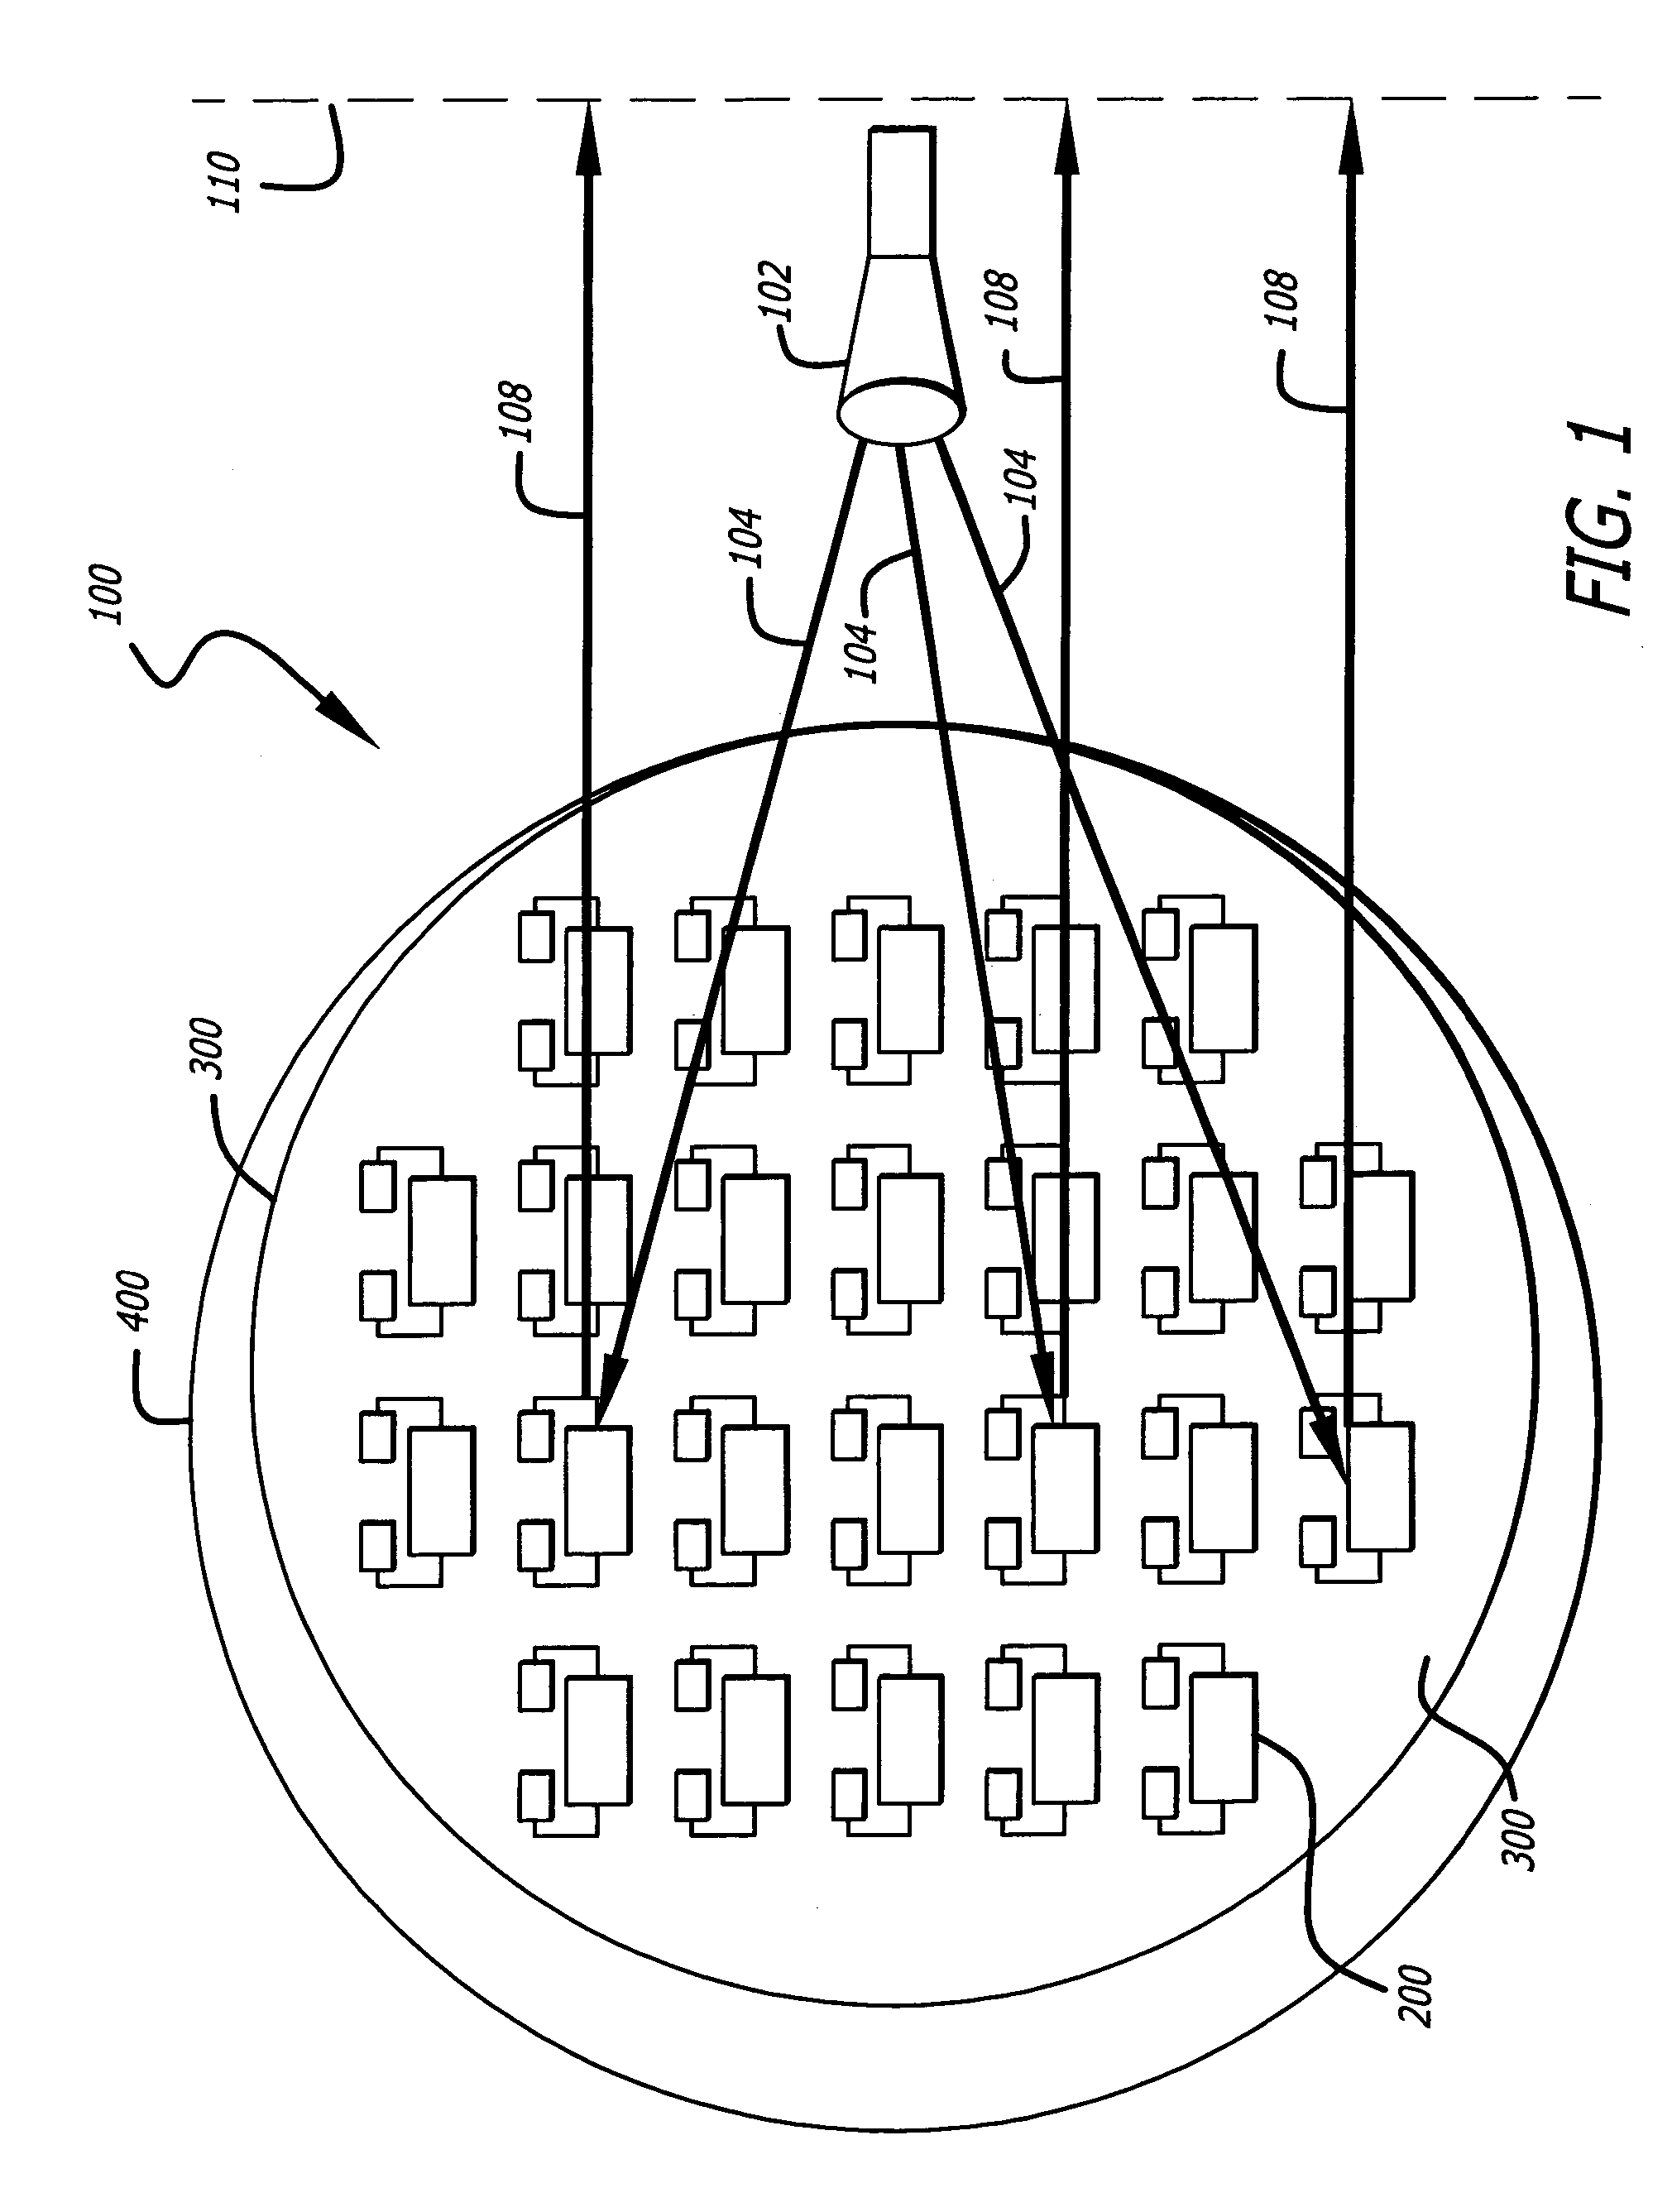 Reflective and transmissive mode monolithic millimeter wave array system and in-line amplifier using same